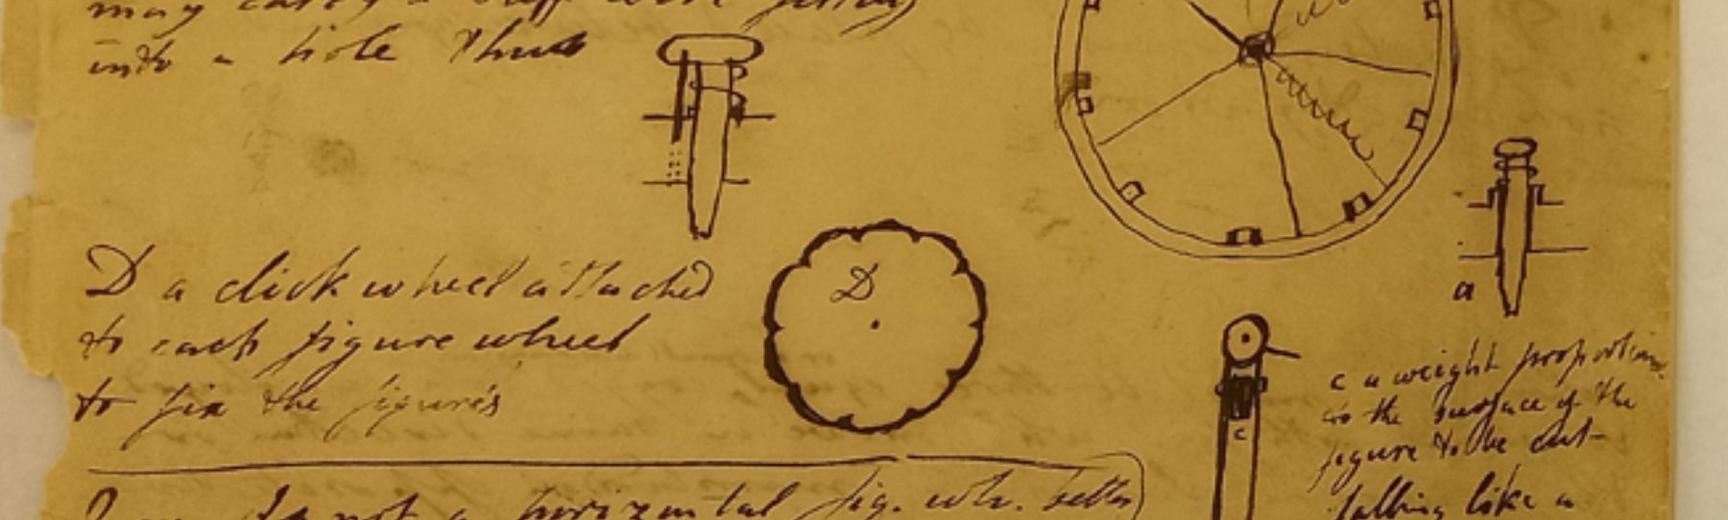 Charles Babbage 1822 MS Buxton 9 2 1r 2r (Early designs)